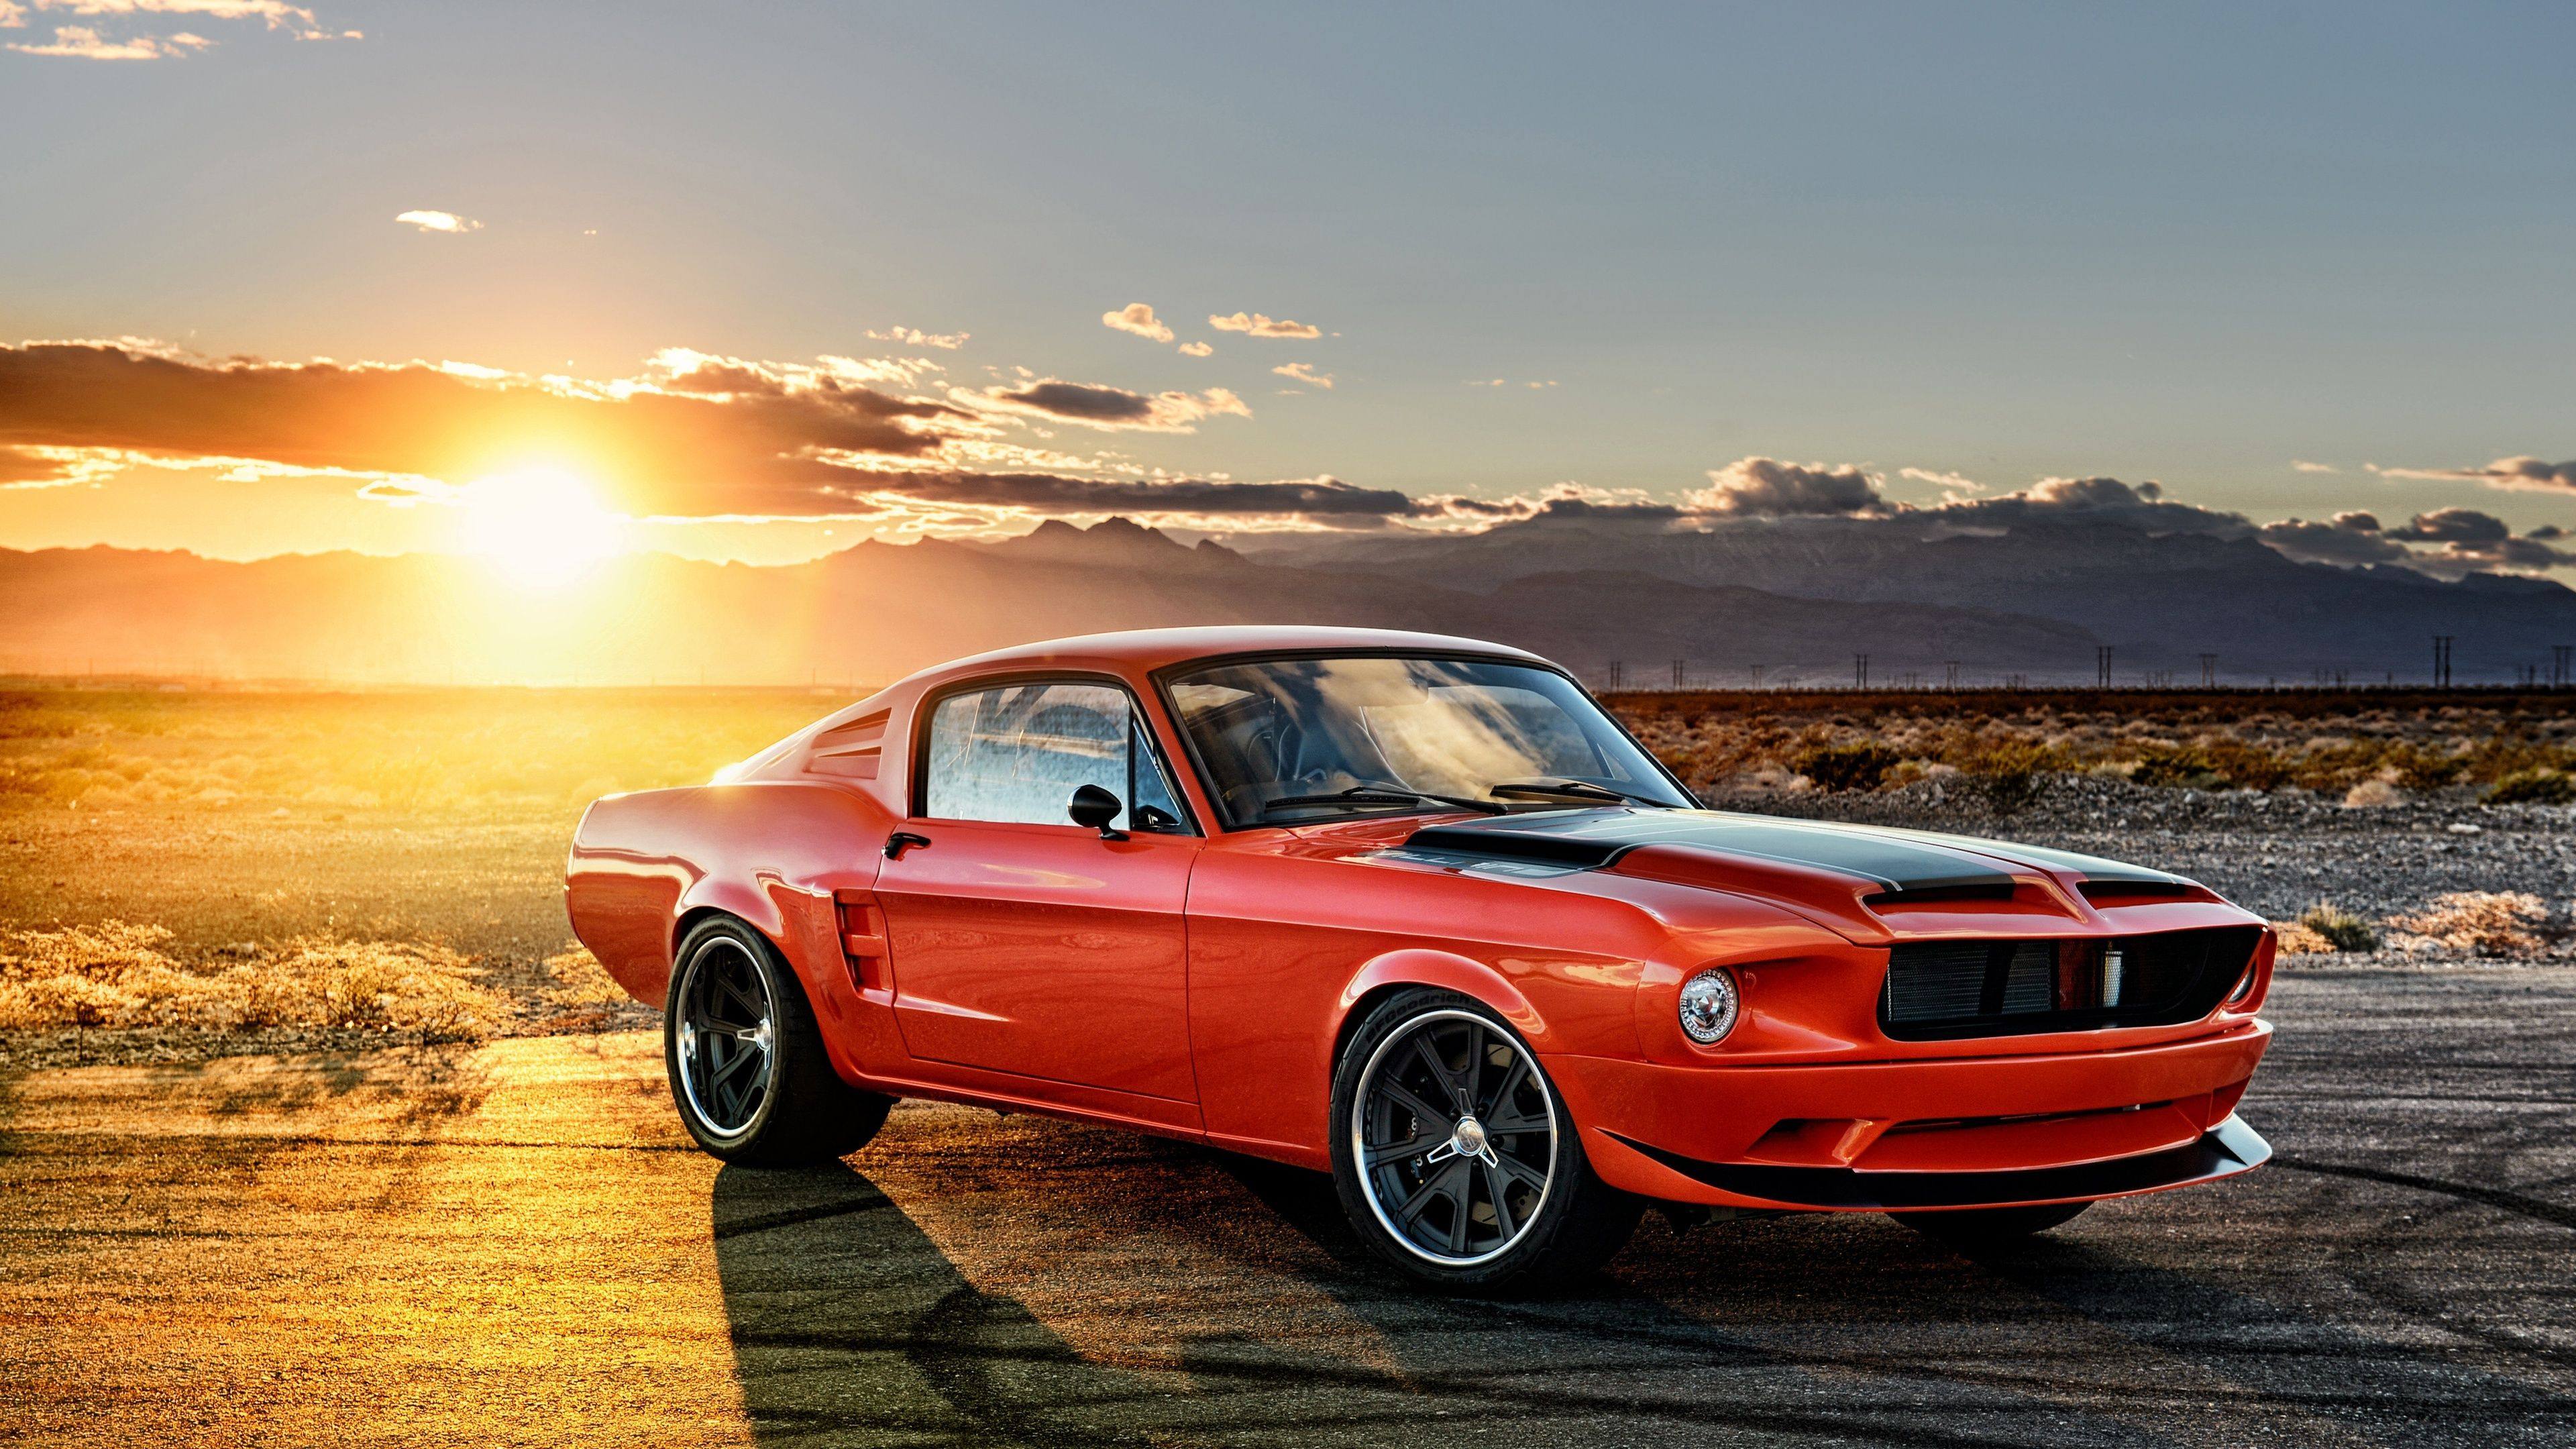 3840x2160 Ford Muscle Car Wallpapers Top Free Ford Muscle Car Backgrounds